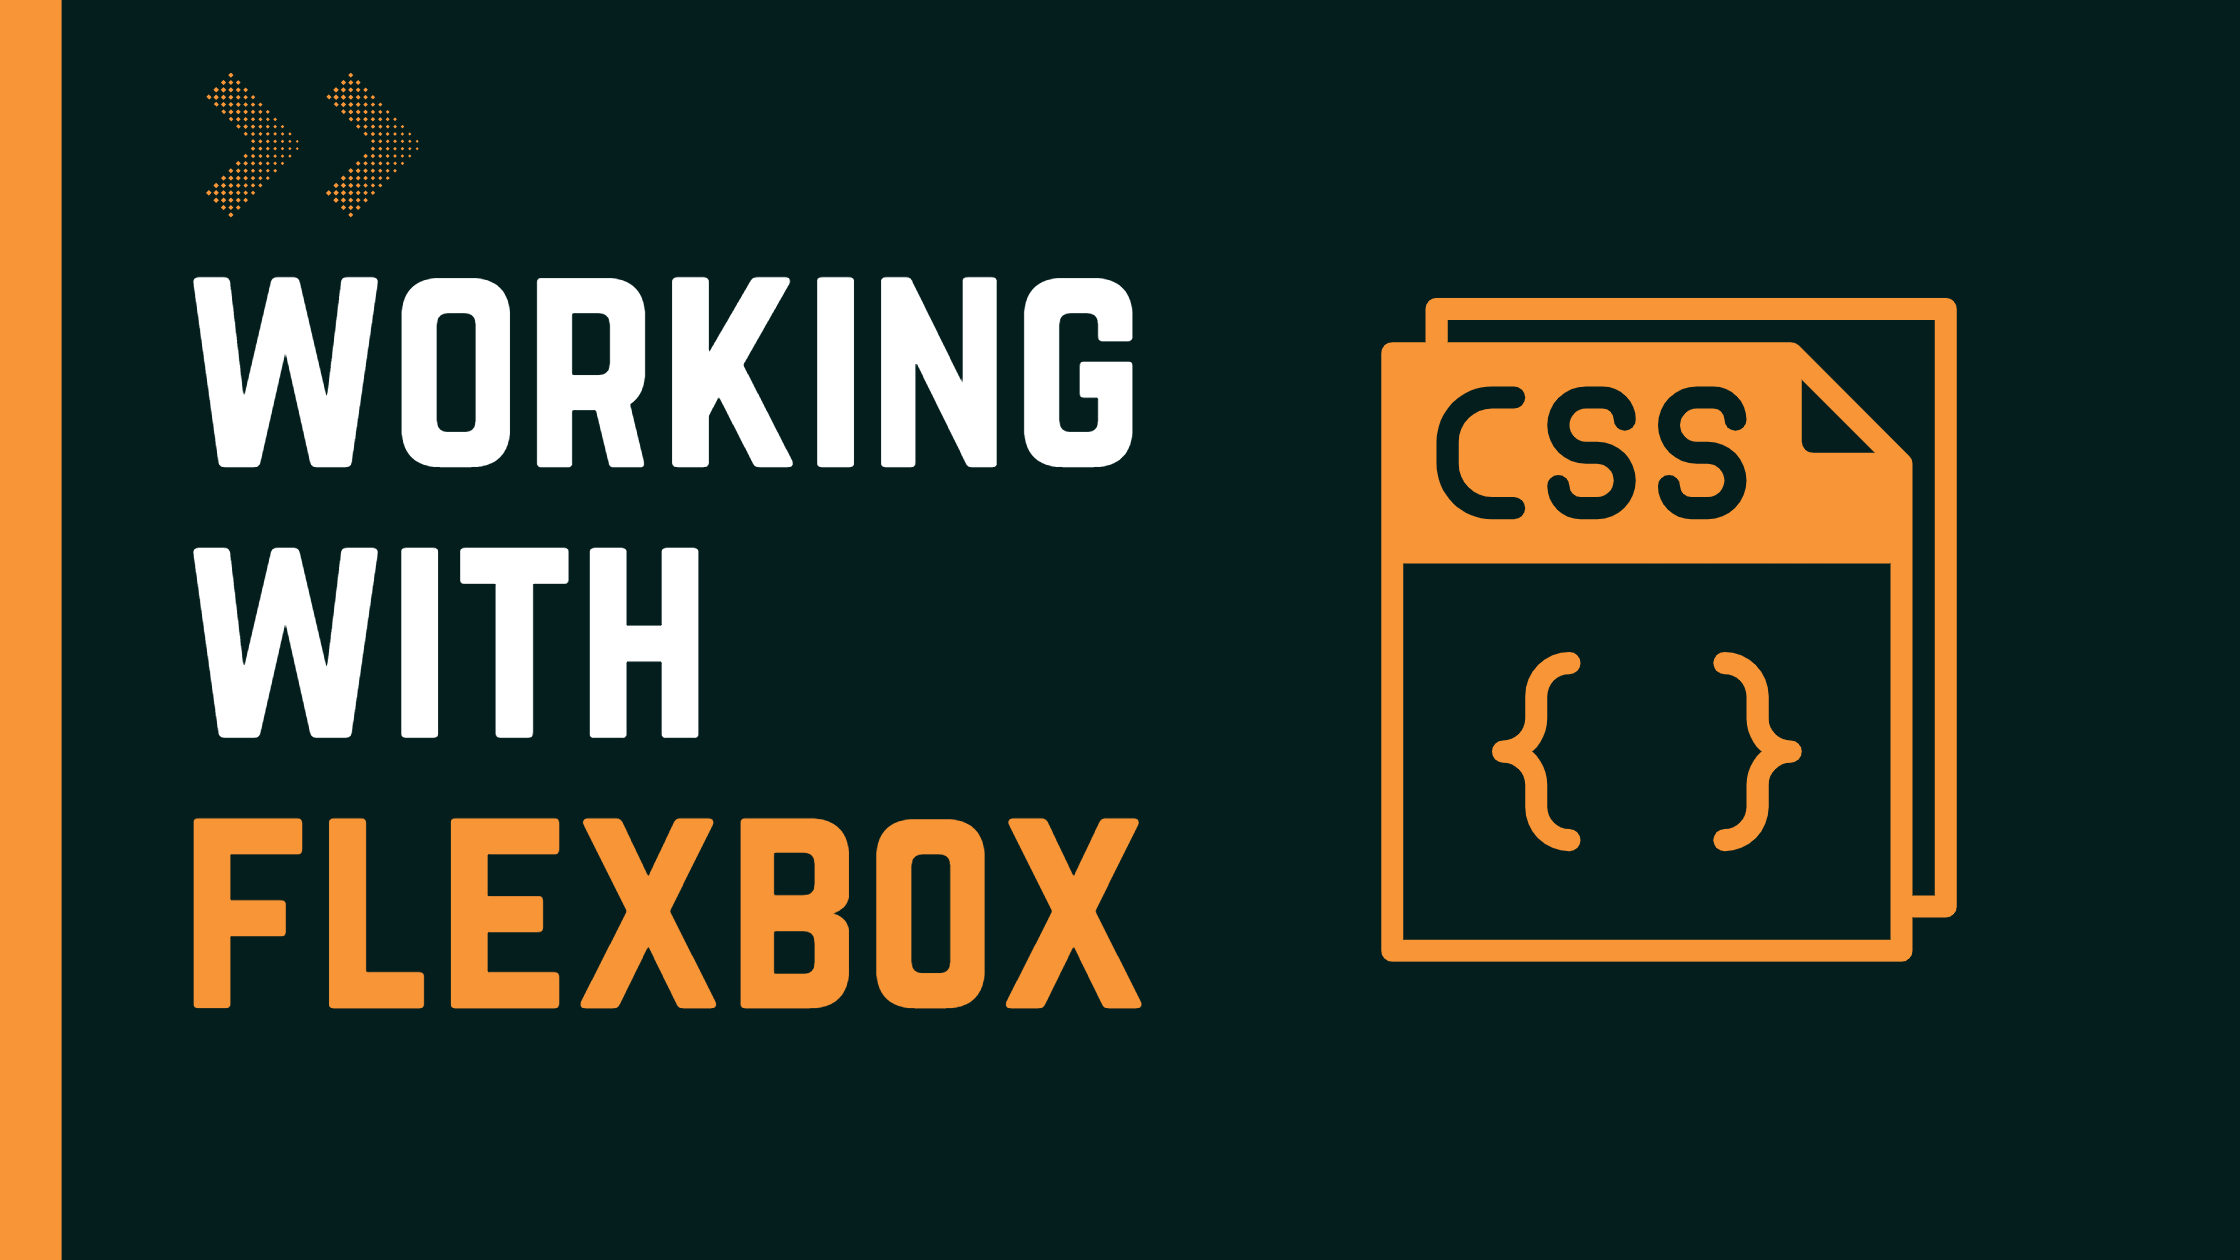 Working With CSS3 FlexBox